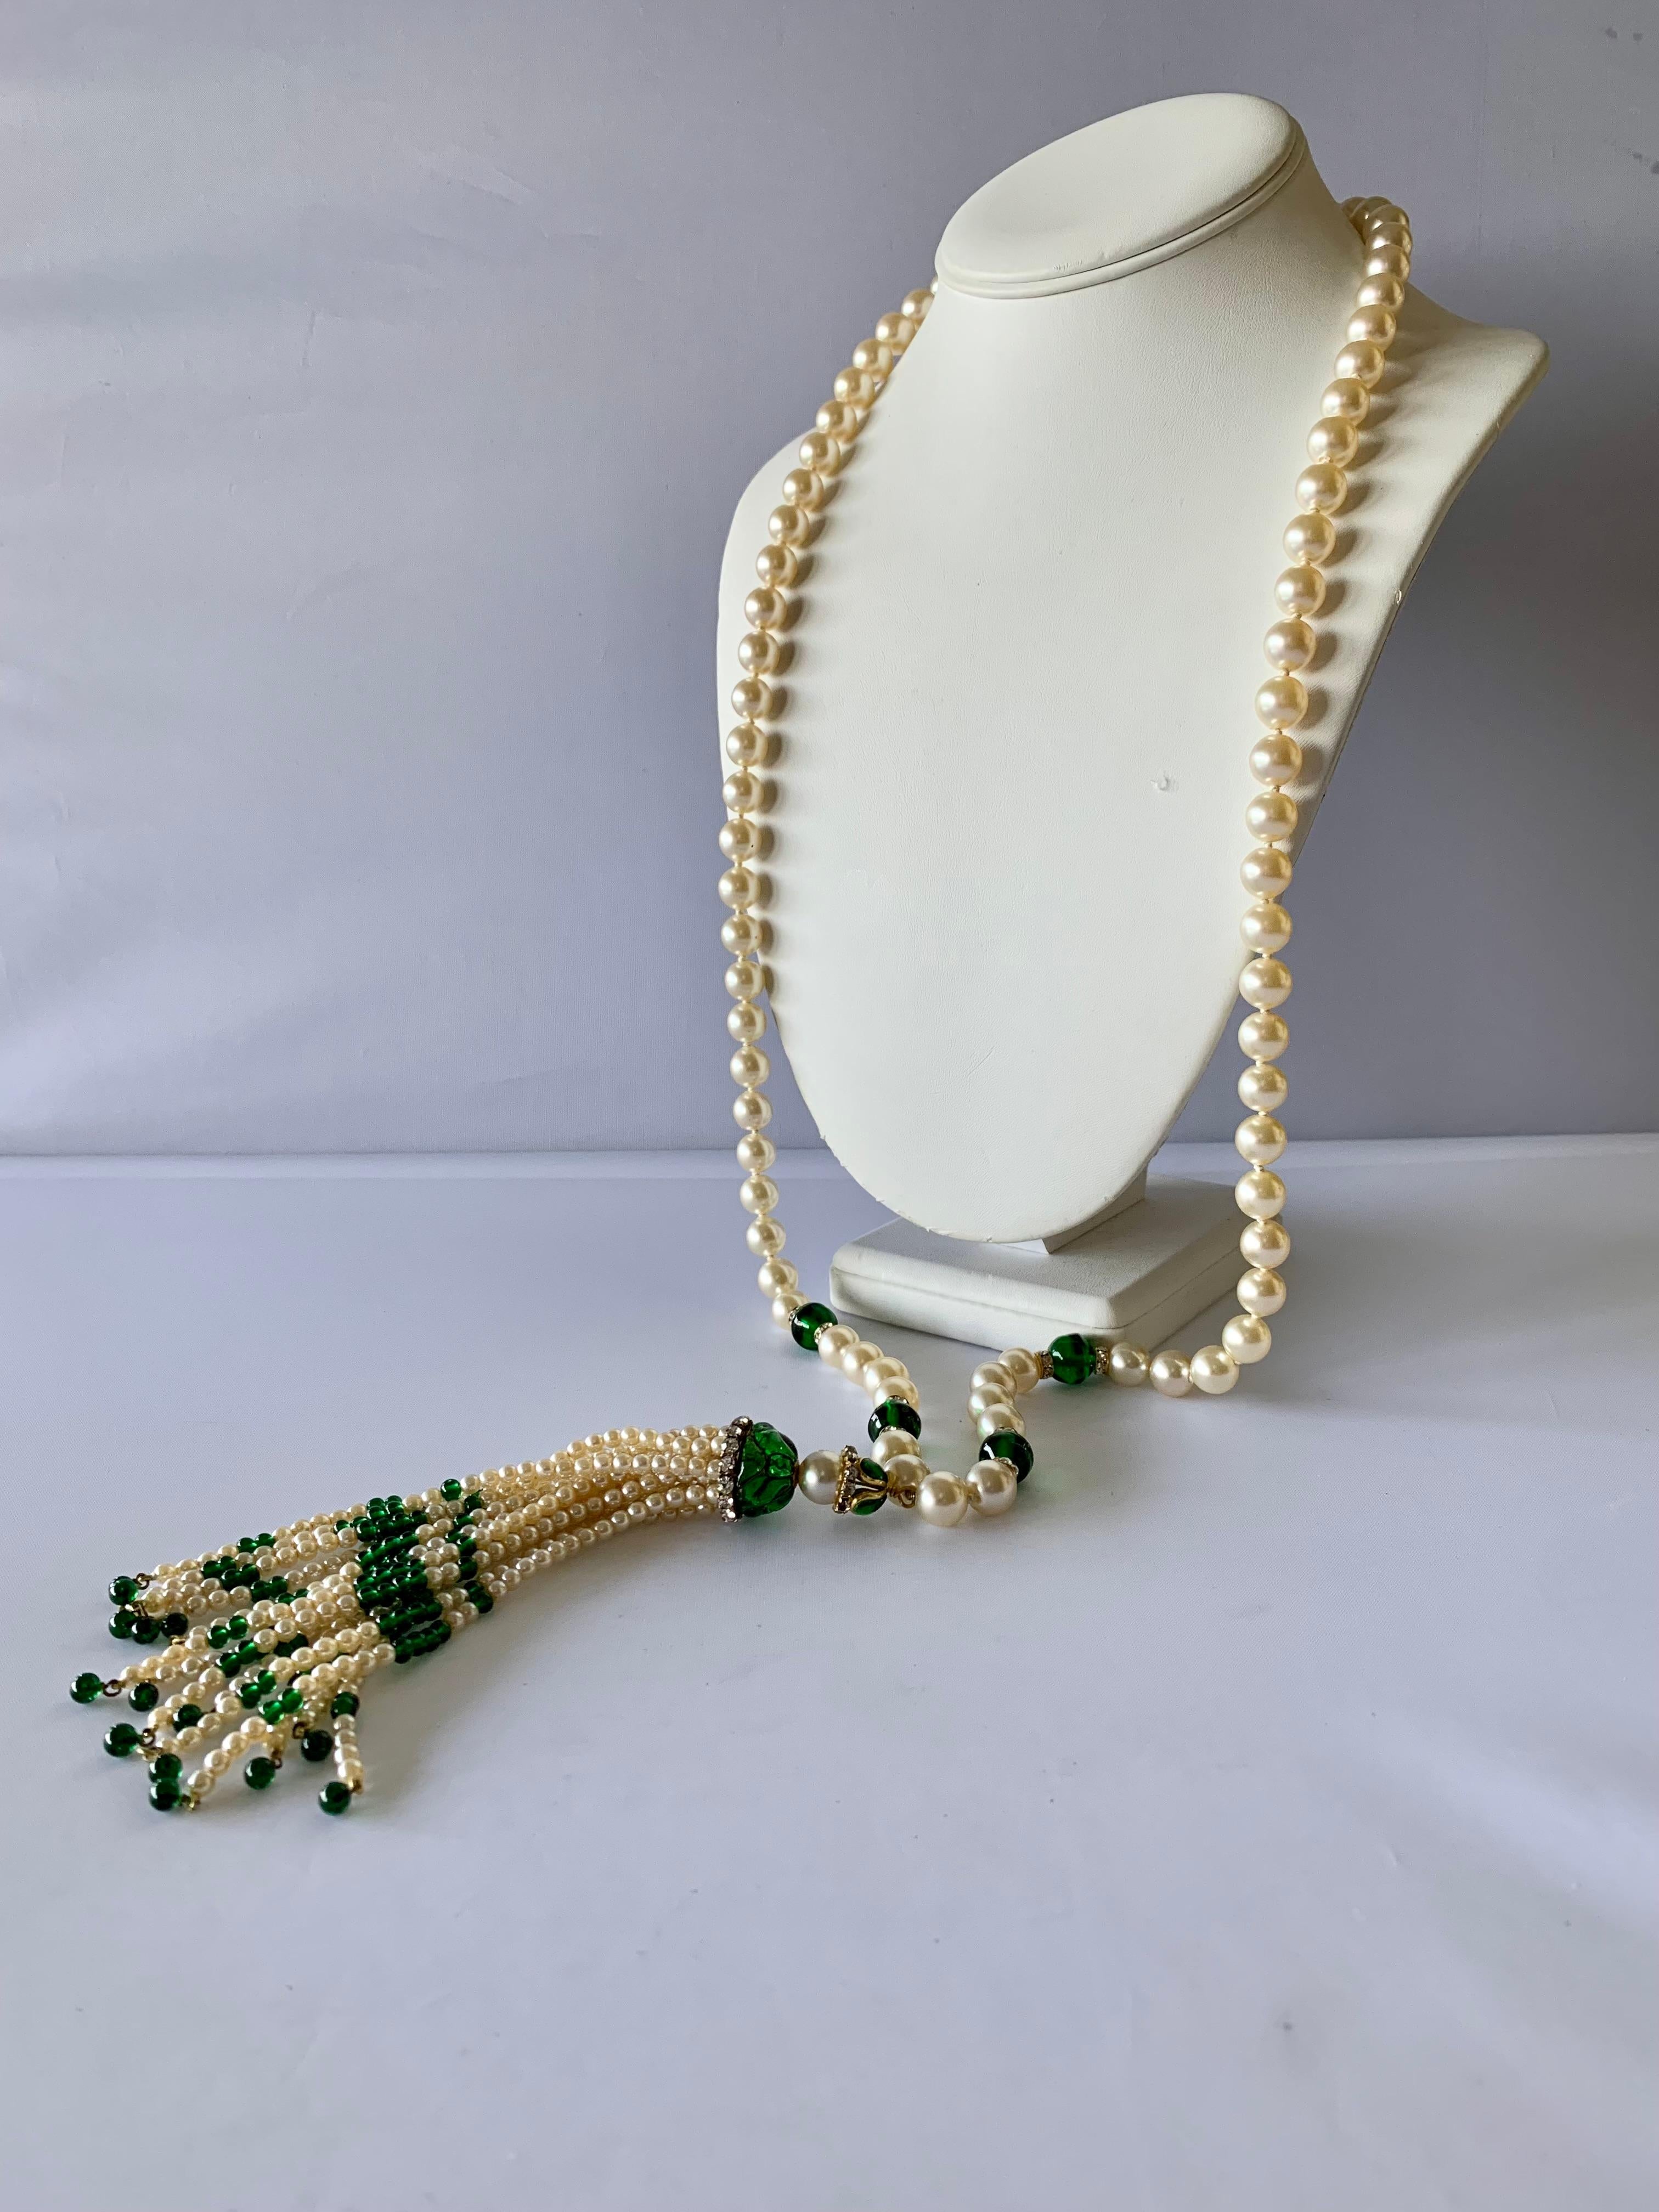 Absolutely stunning vintage art-deco tassel sautoir, comprised of large glass pearls, diamante rhinestones, and green poured glass stones (by Maison Gripoix). This piece is a rare example of the kind of handwork Chanel was famous for. The piece ends